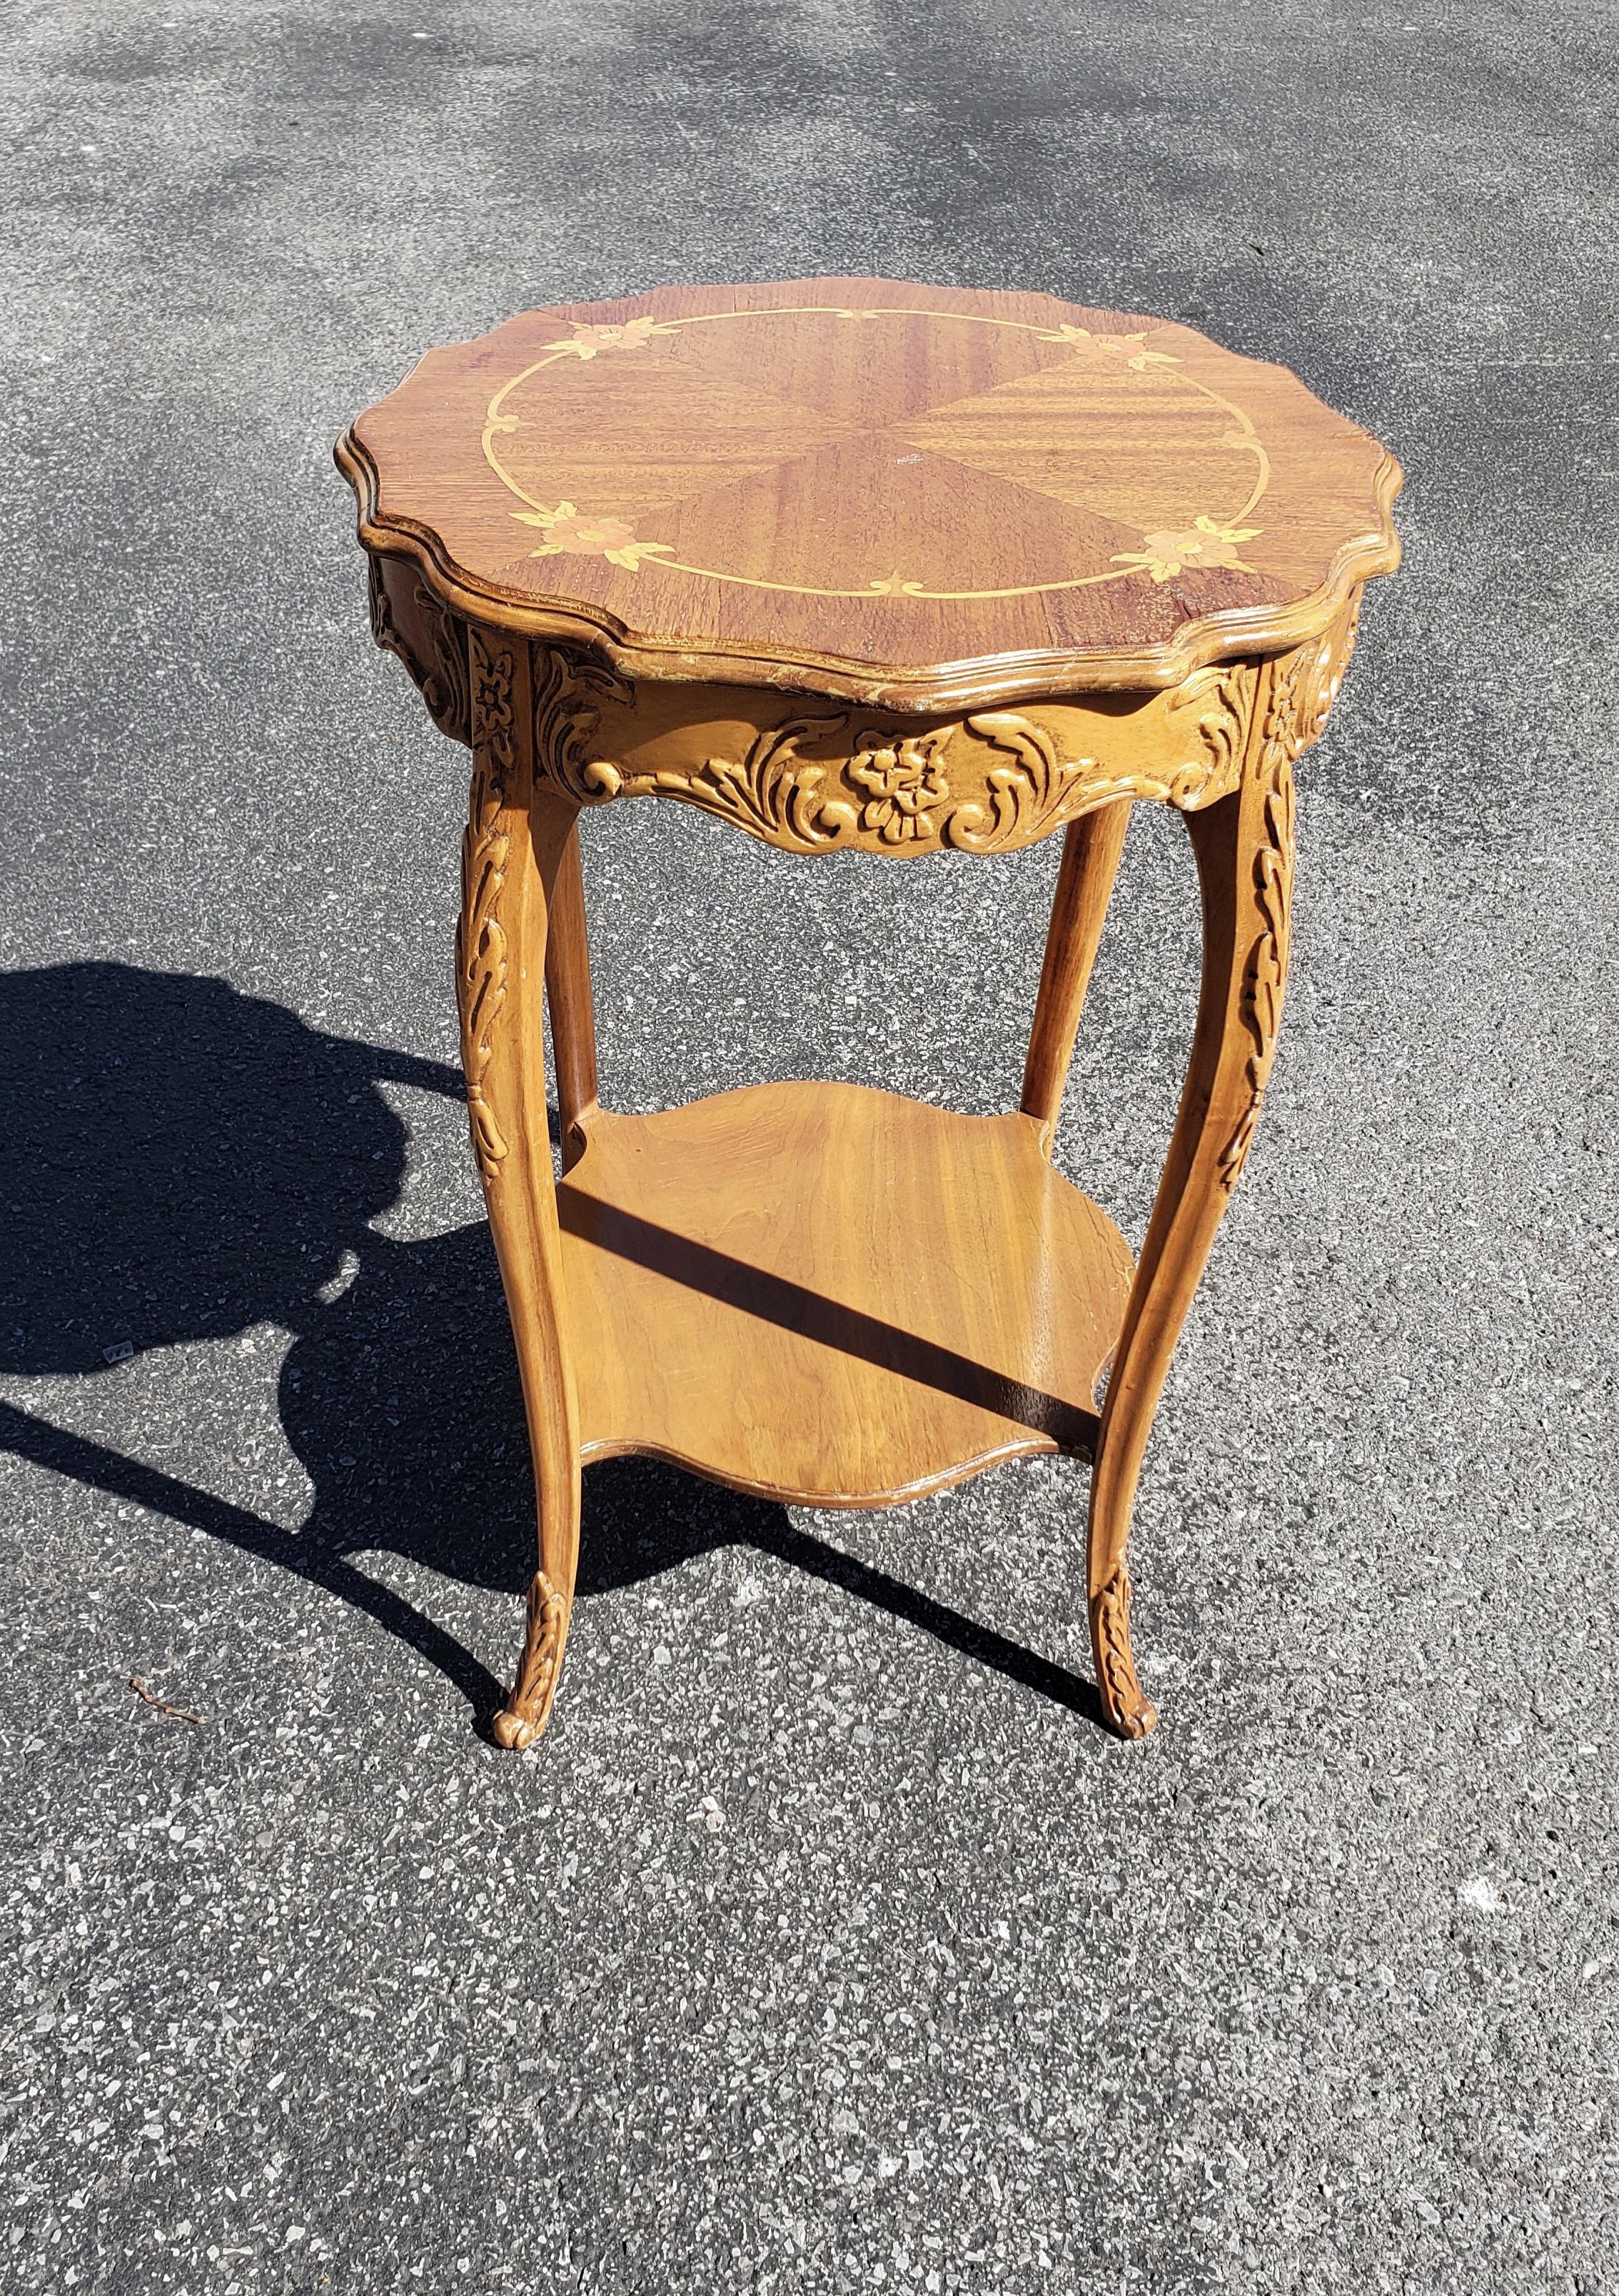 Rococo Revival Marquetry fruitwood side table. Measures 18.25